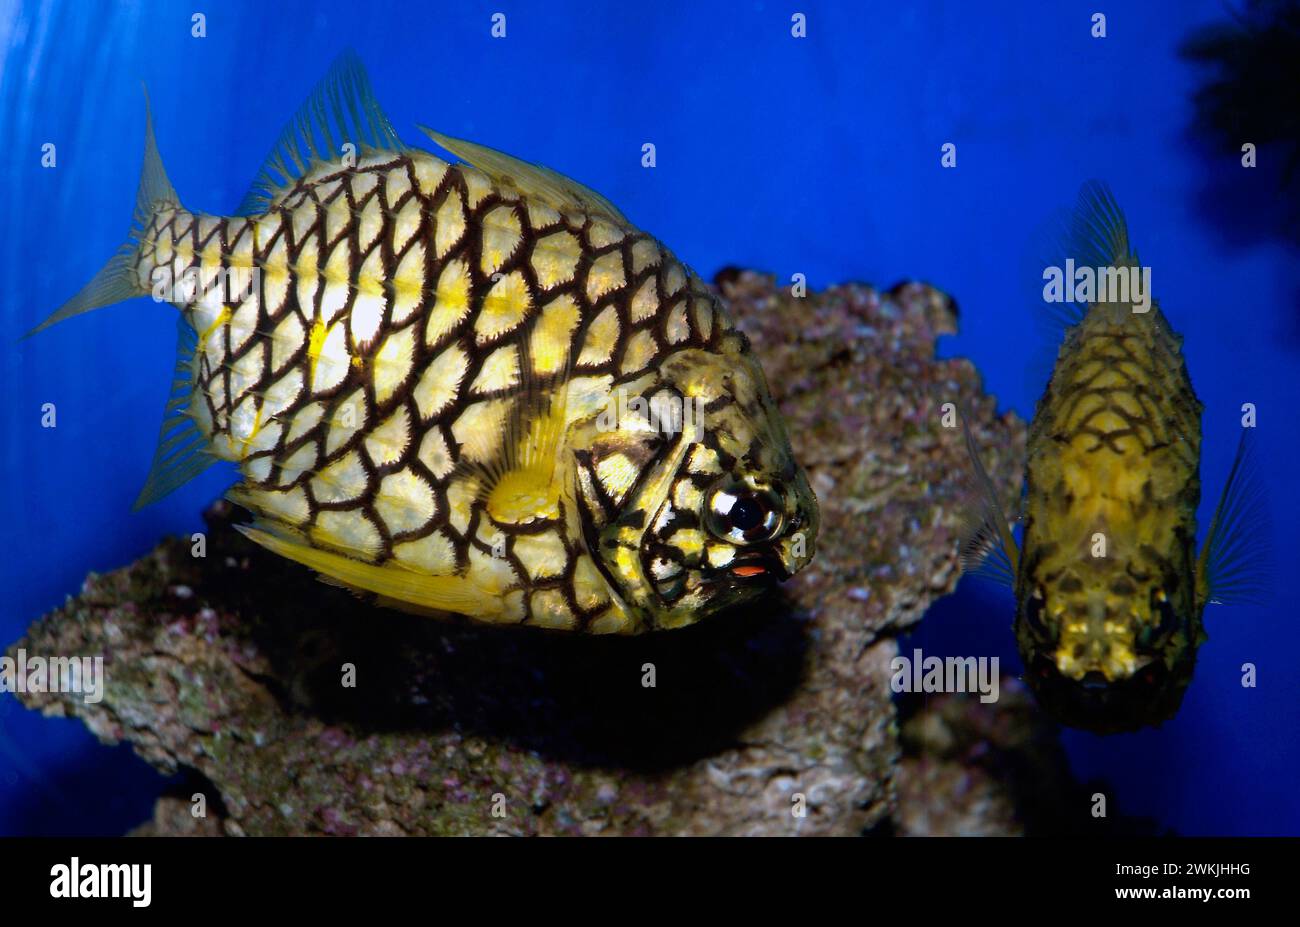 Japanese pineapplefish (Monocentris japonica) is a marine fish native to tropical Indo-Pacific Ocean. Stock Photo